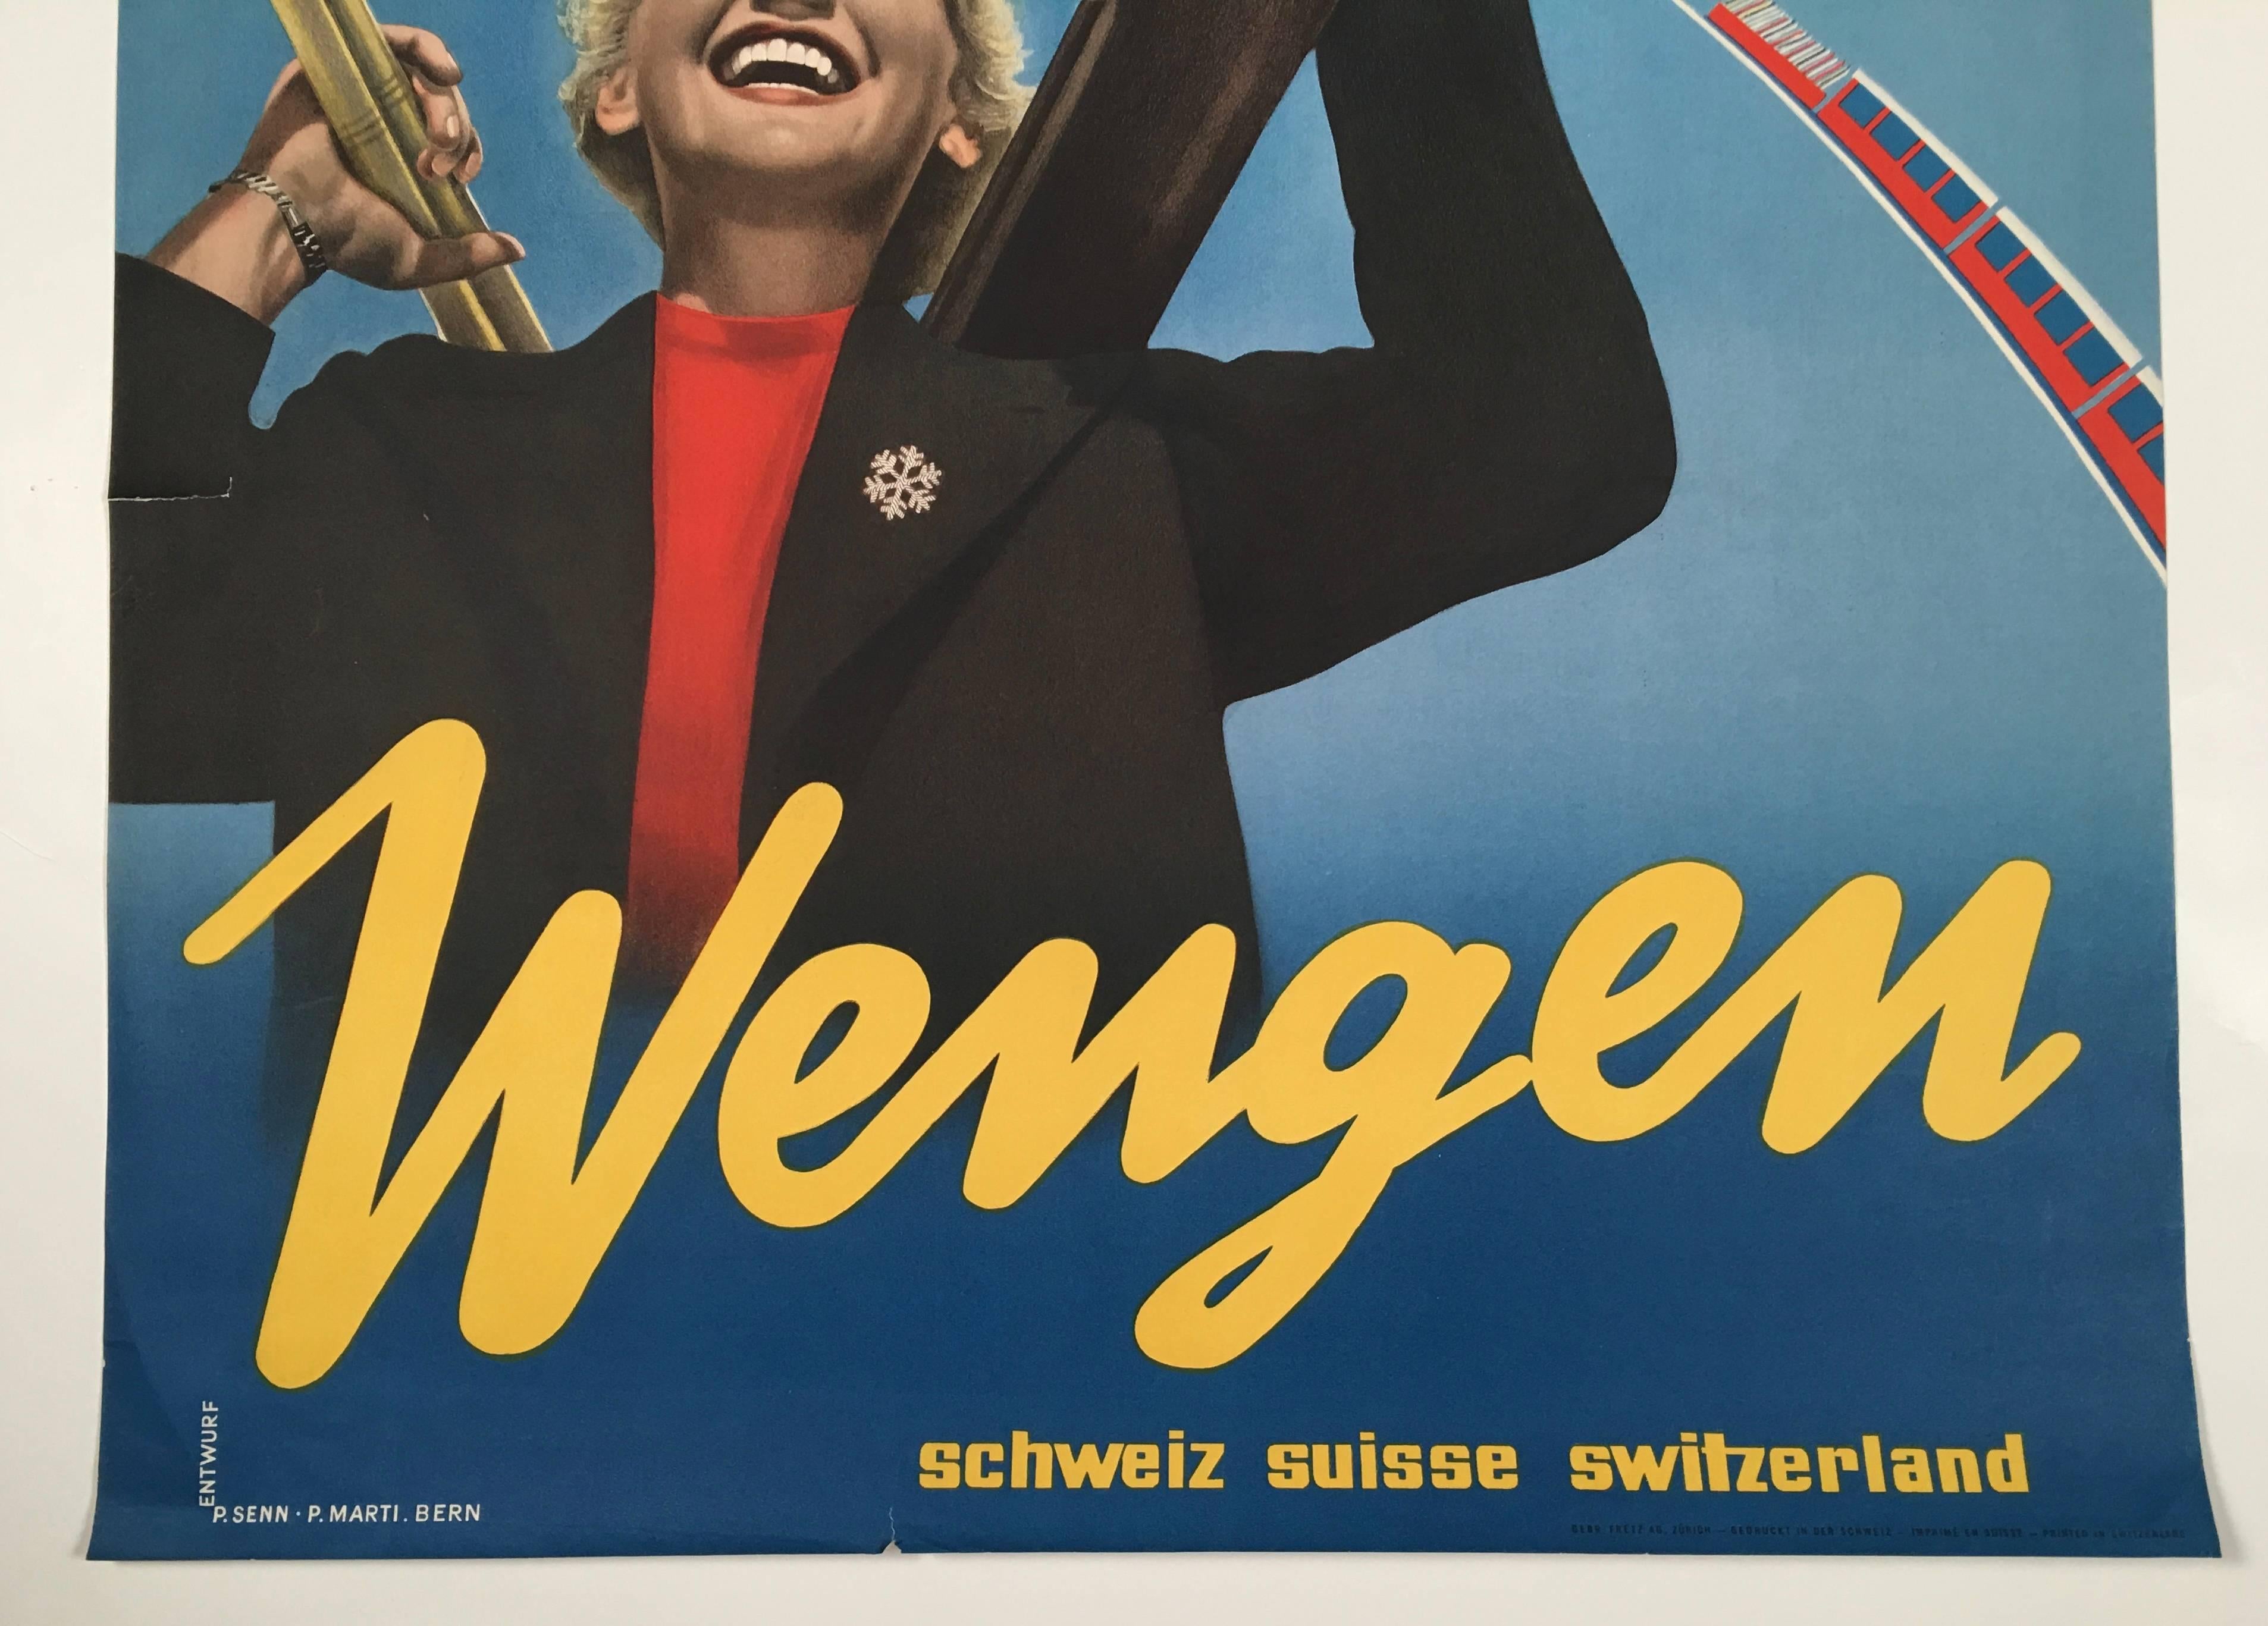 Wengen Swiss Ski Poster by P. Senn and P. Marti In Good Condition For Sale In Essex, MA